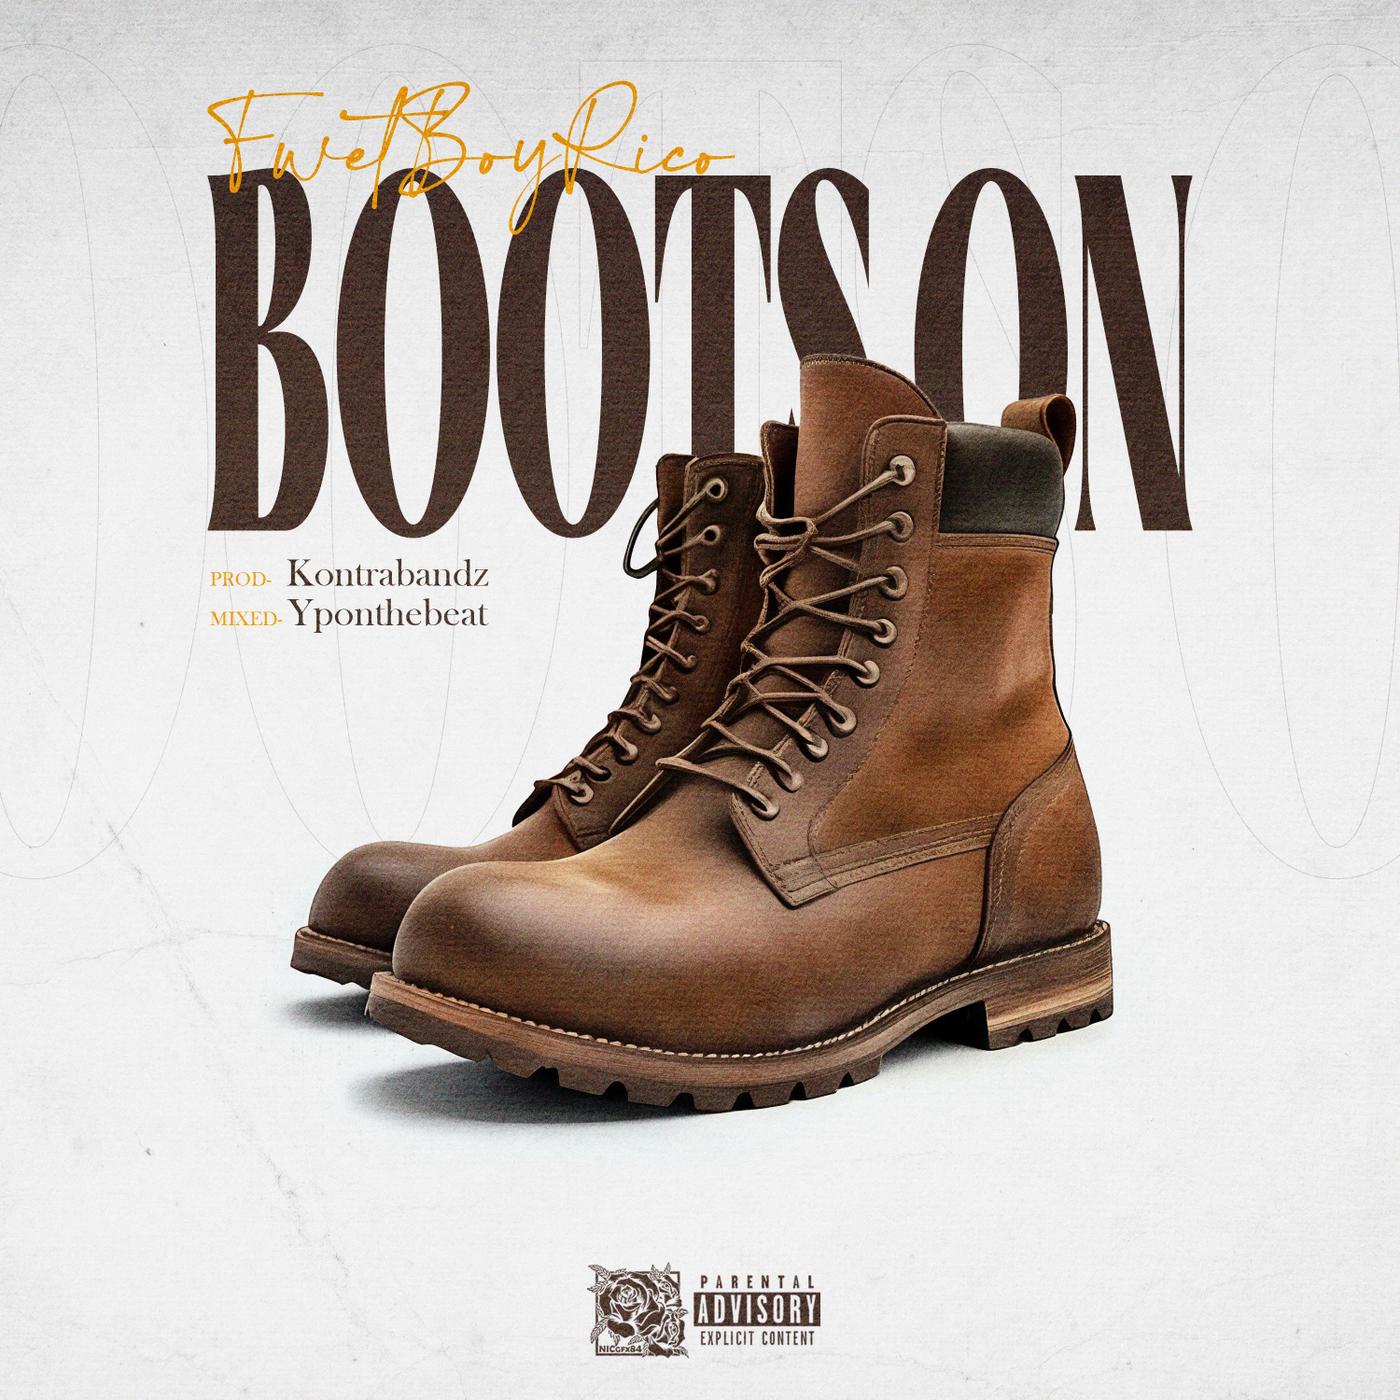 Fwet Boy Rico - Boots On